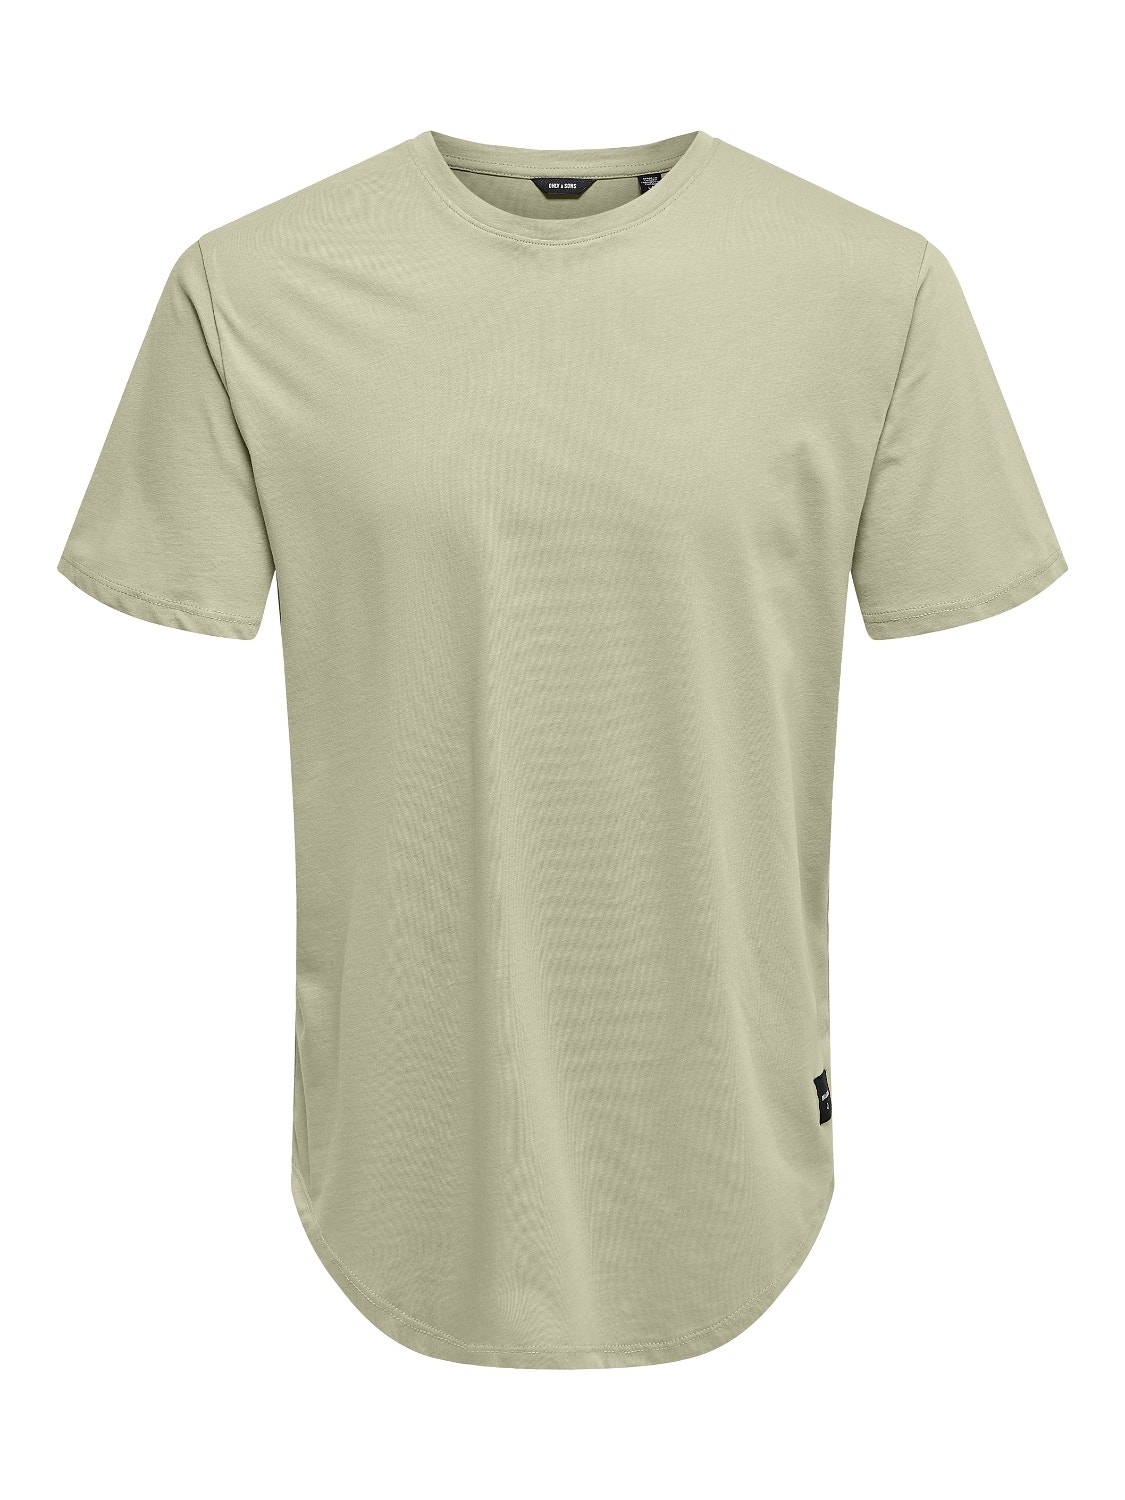 ONLY & SONS Long o-neck t-shirt -Pelican - 22002973